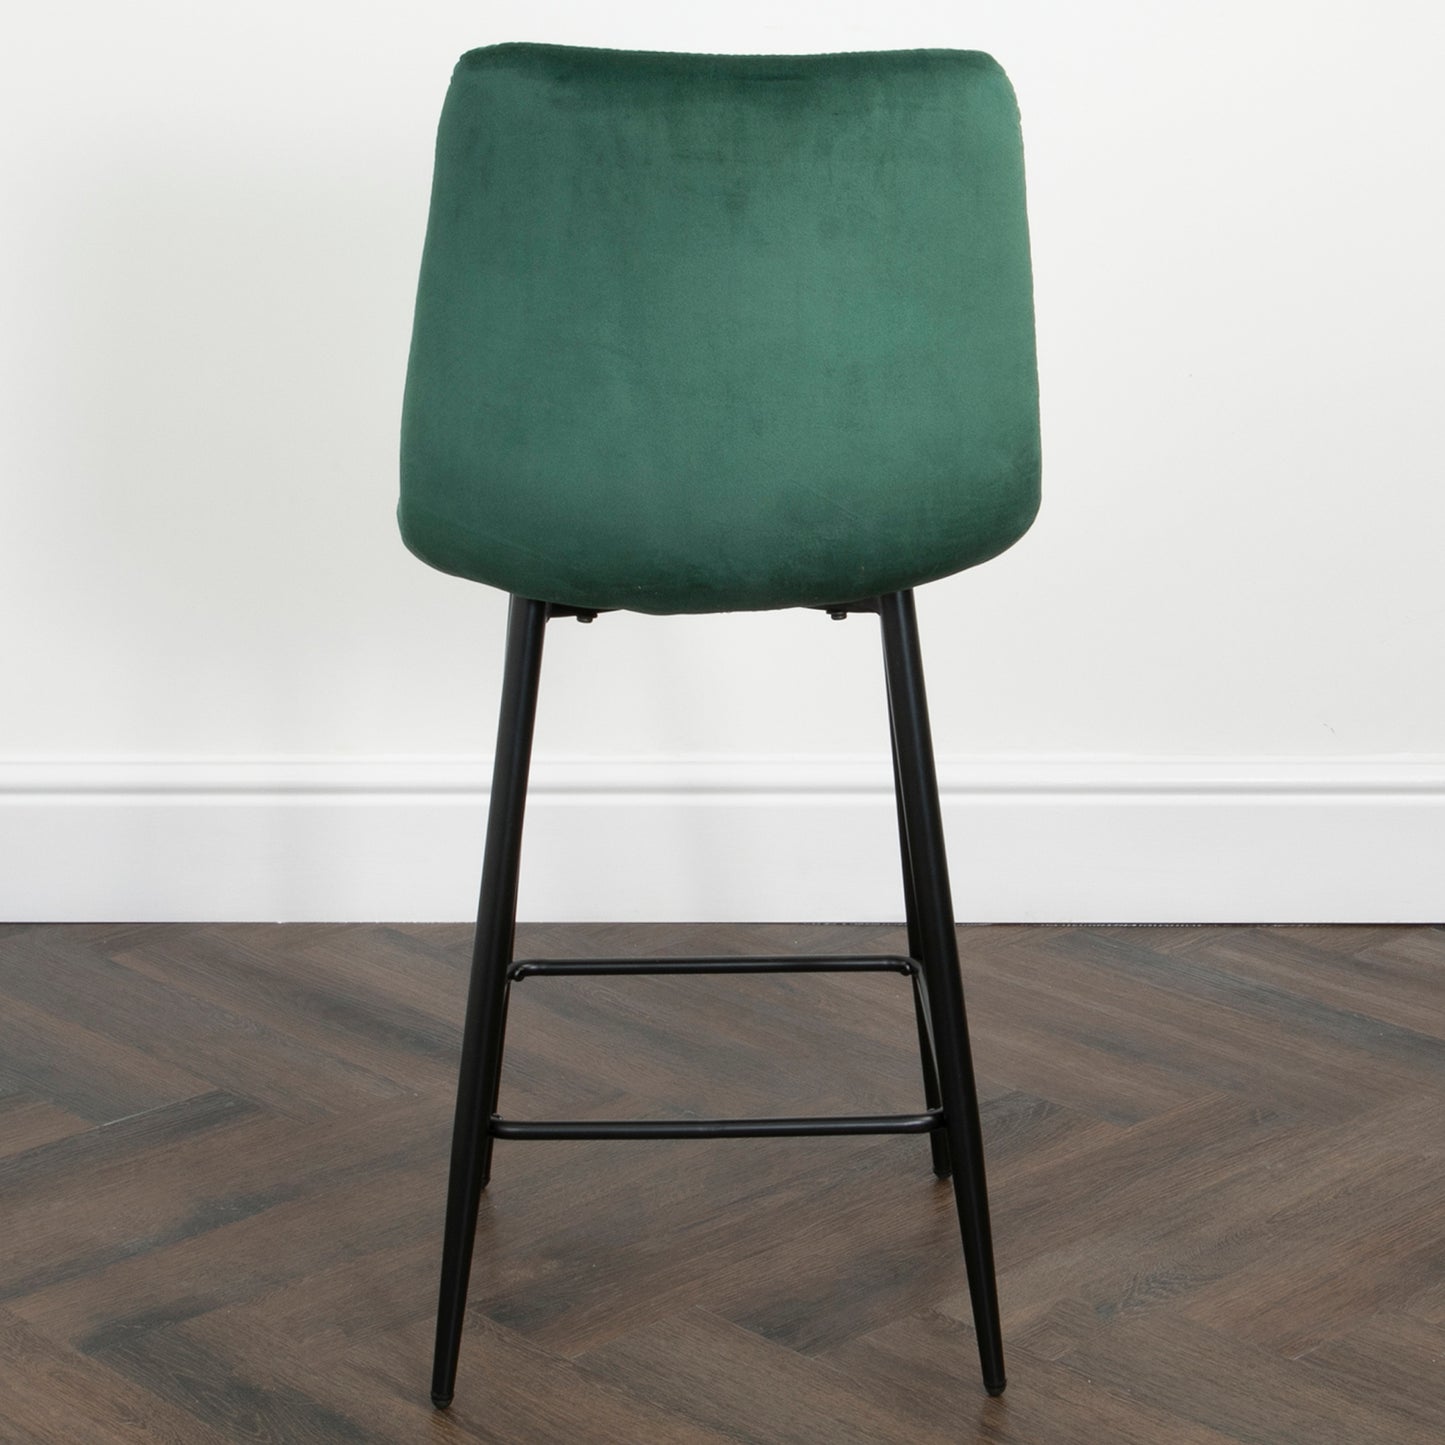 2 Set squared green kitchen bar stool by Native